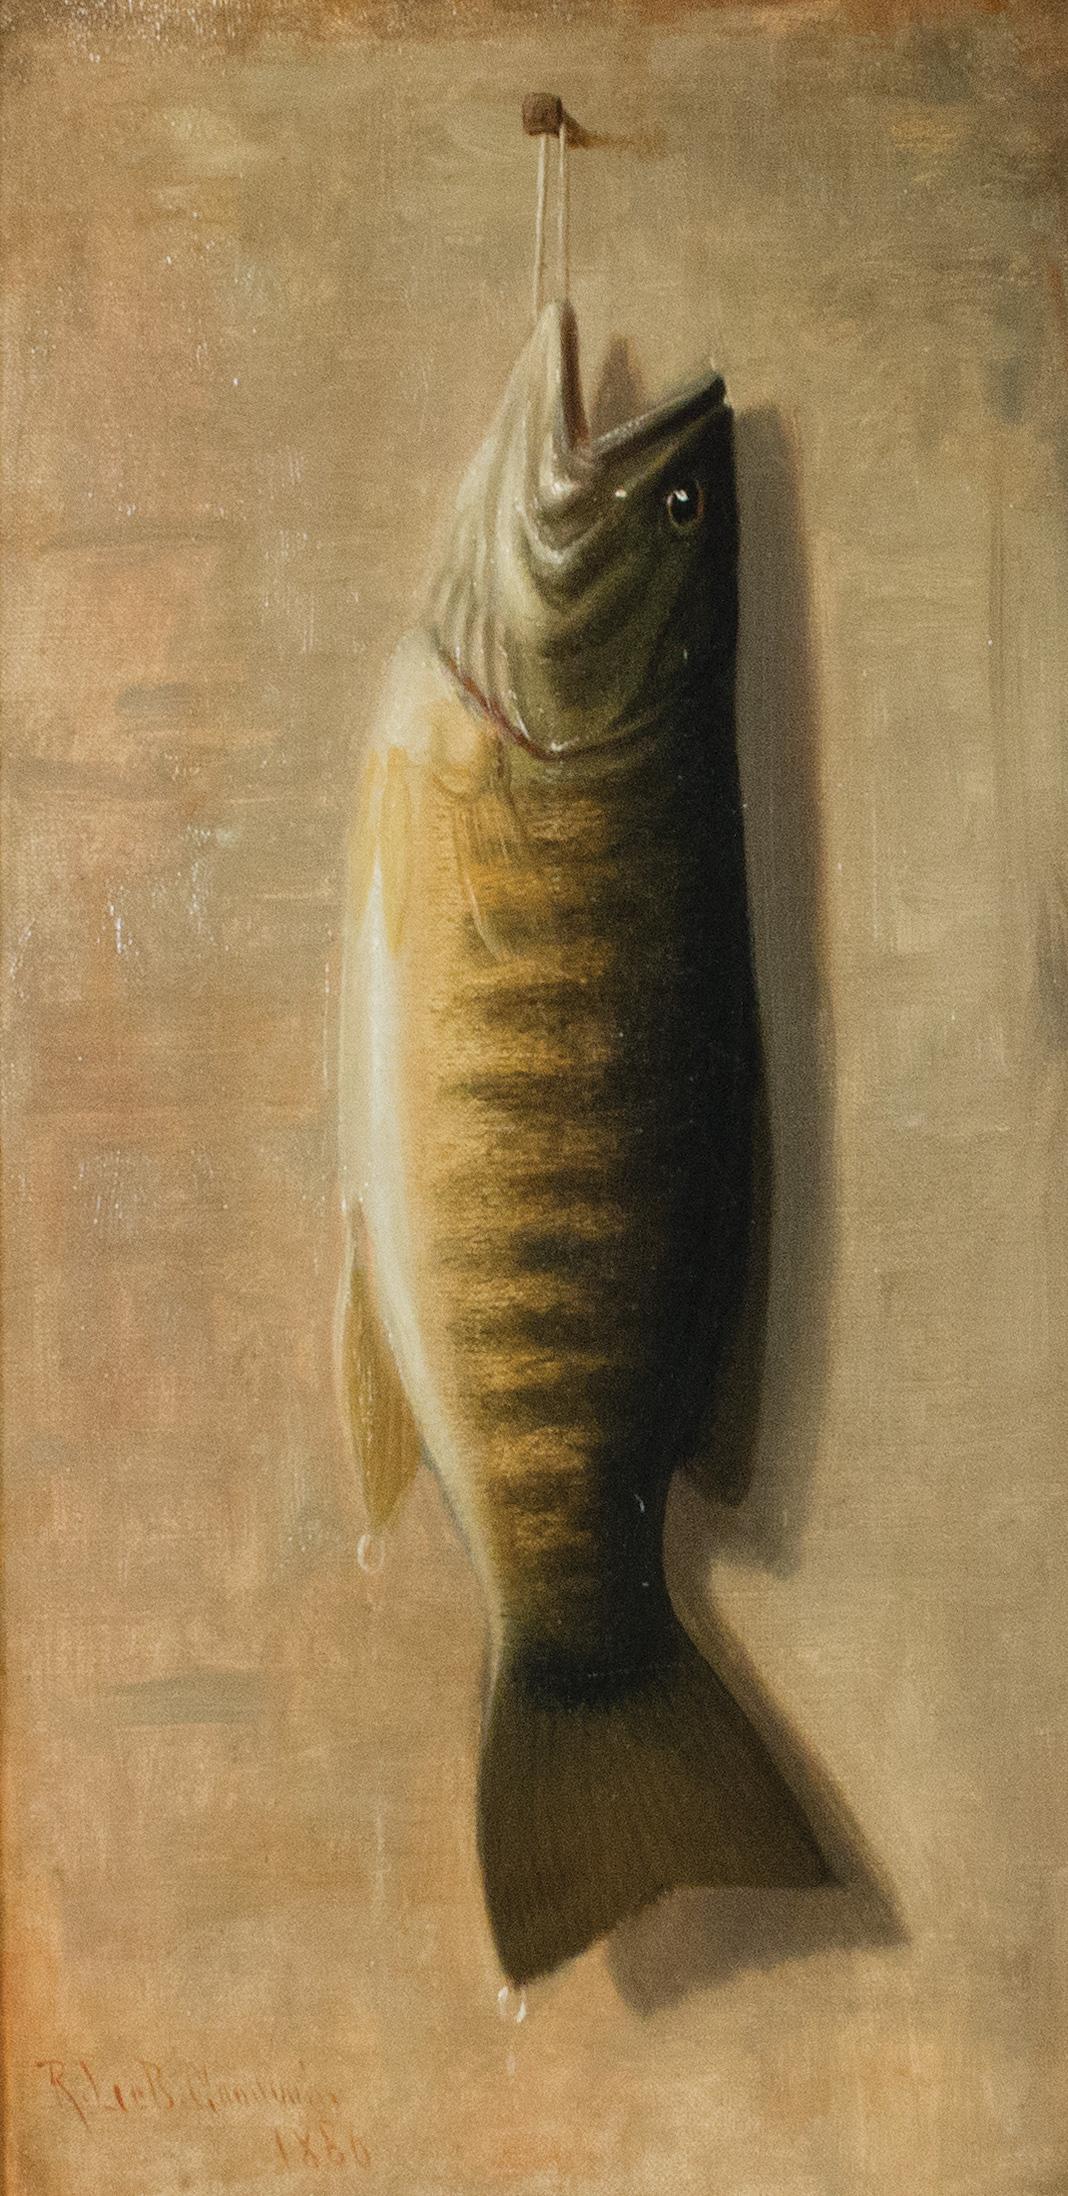 Trophy Fish by Upstate New York Artist Richard Goodwin, 1860 - Painting by Richard Labarre Goodwin